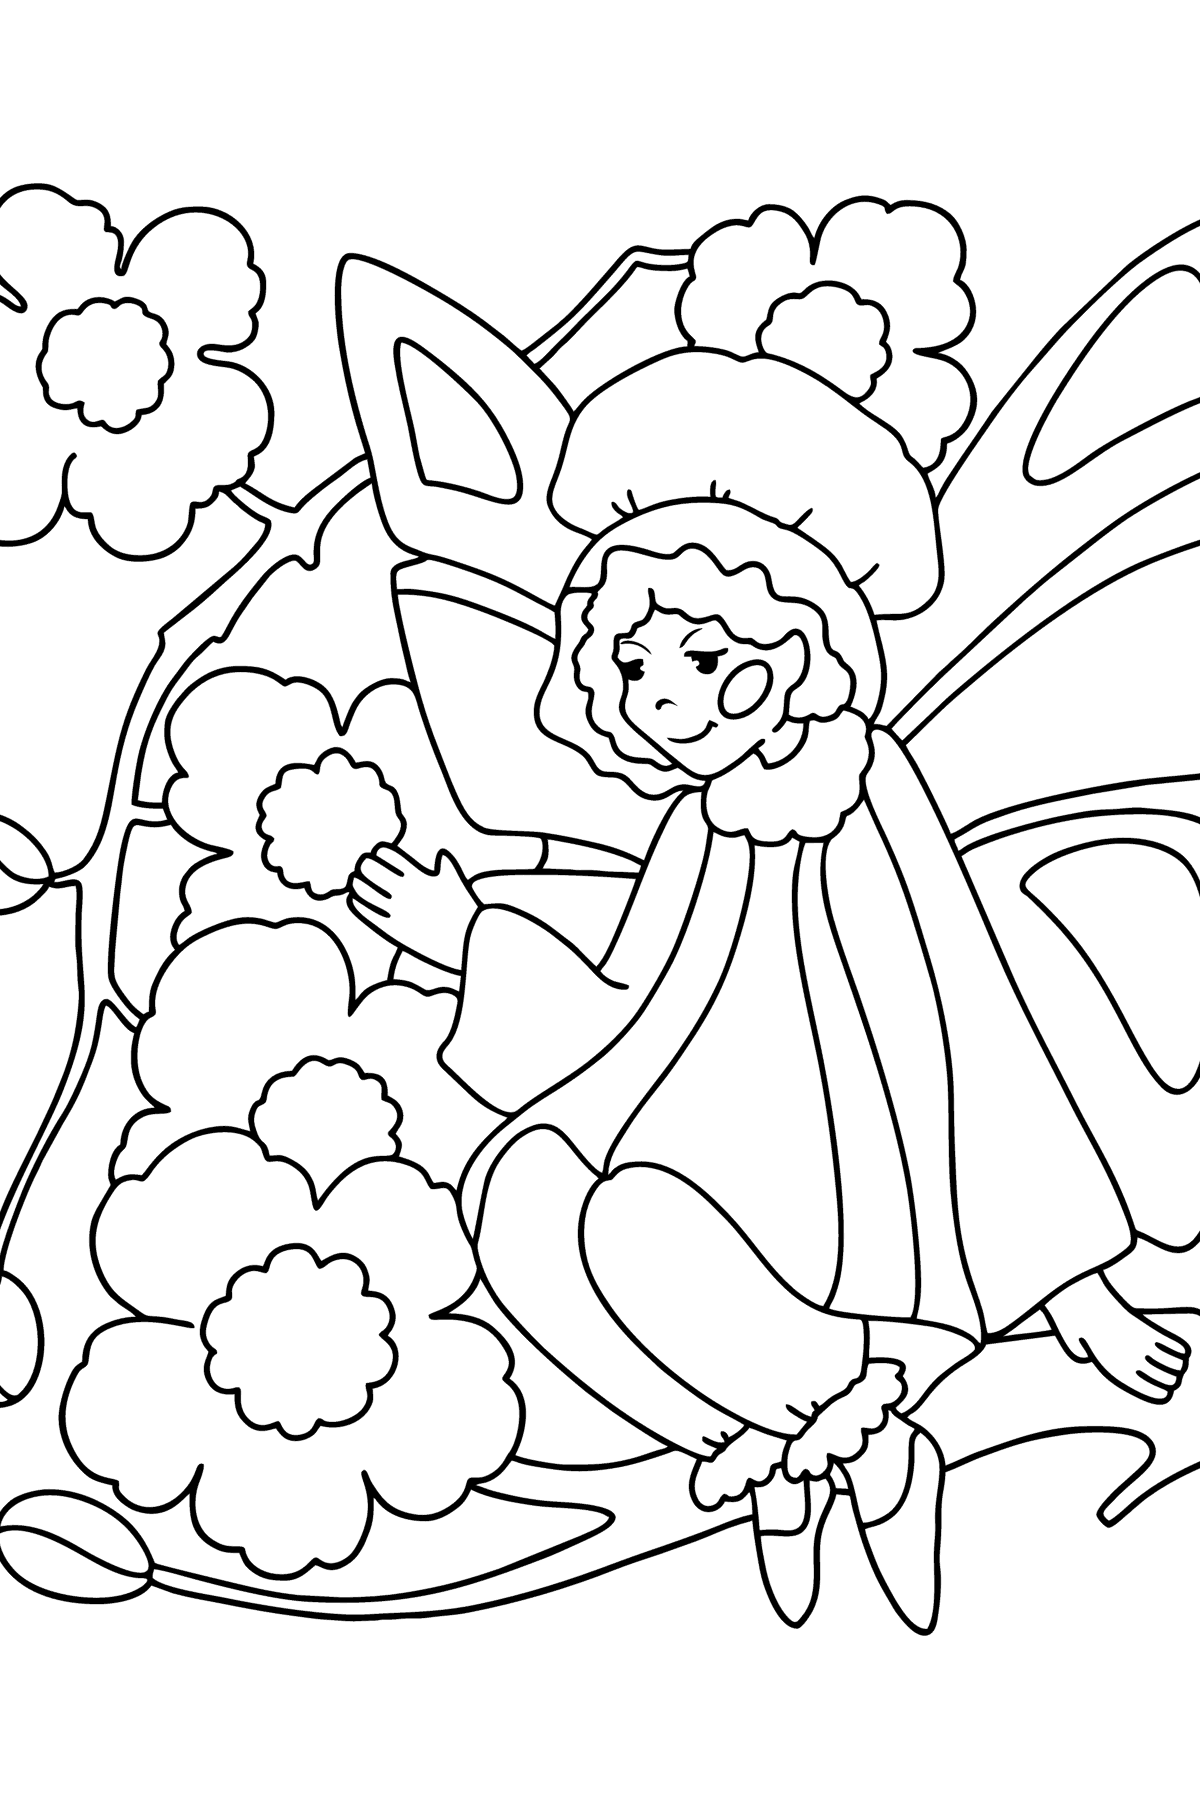 Fairy on a flower coloring page - Coloring Pages for Kids